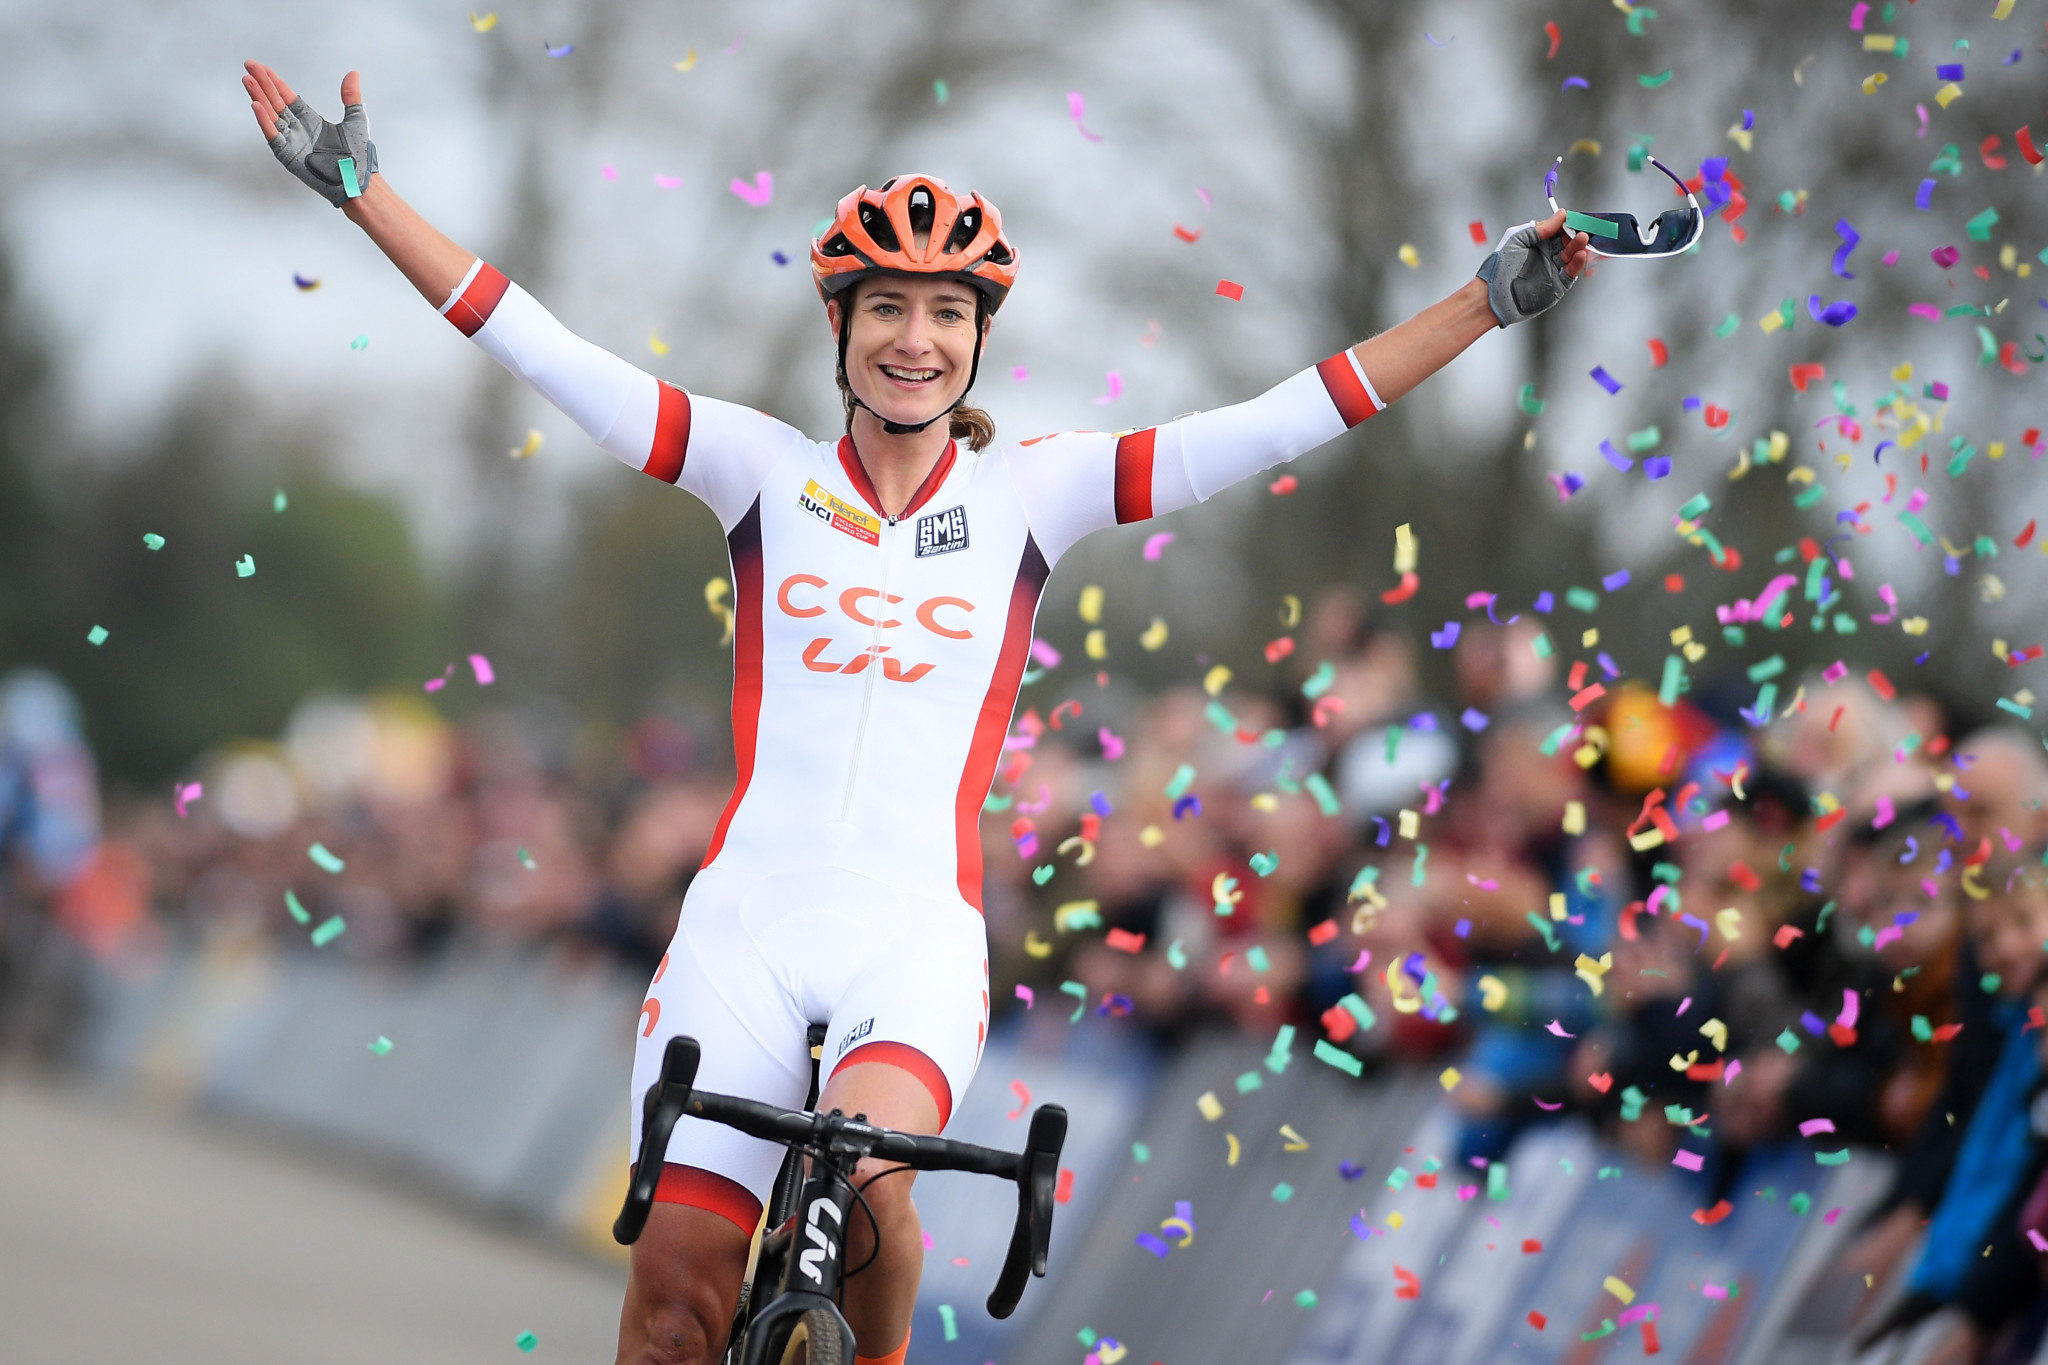 The Netherlands' Marianne Vos has already sealed the women's title having won four races so far this season ©Getty Images